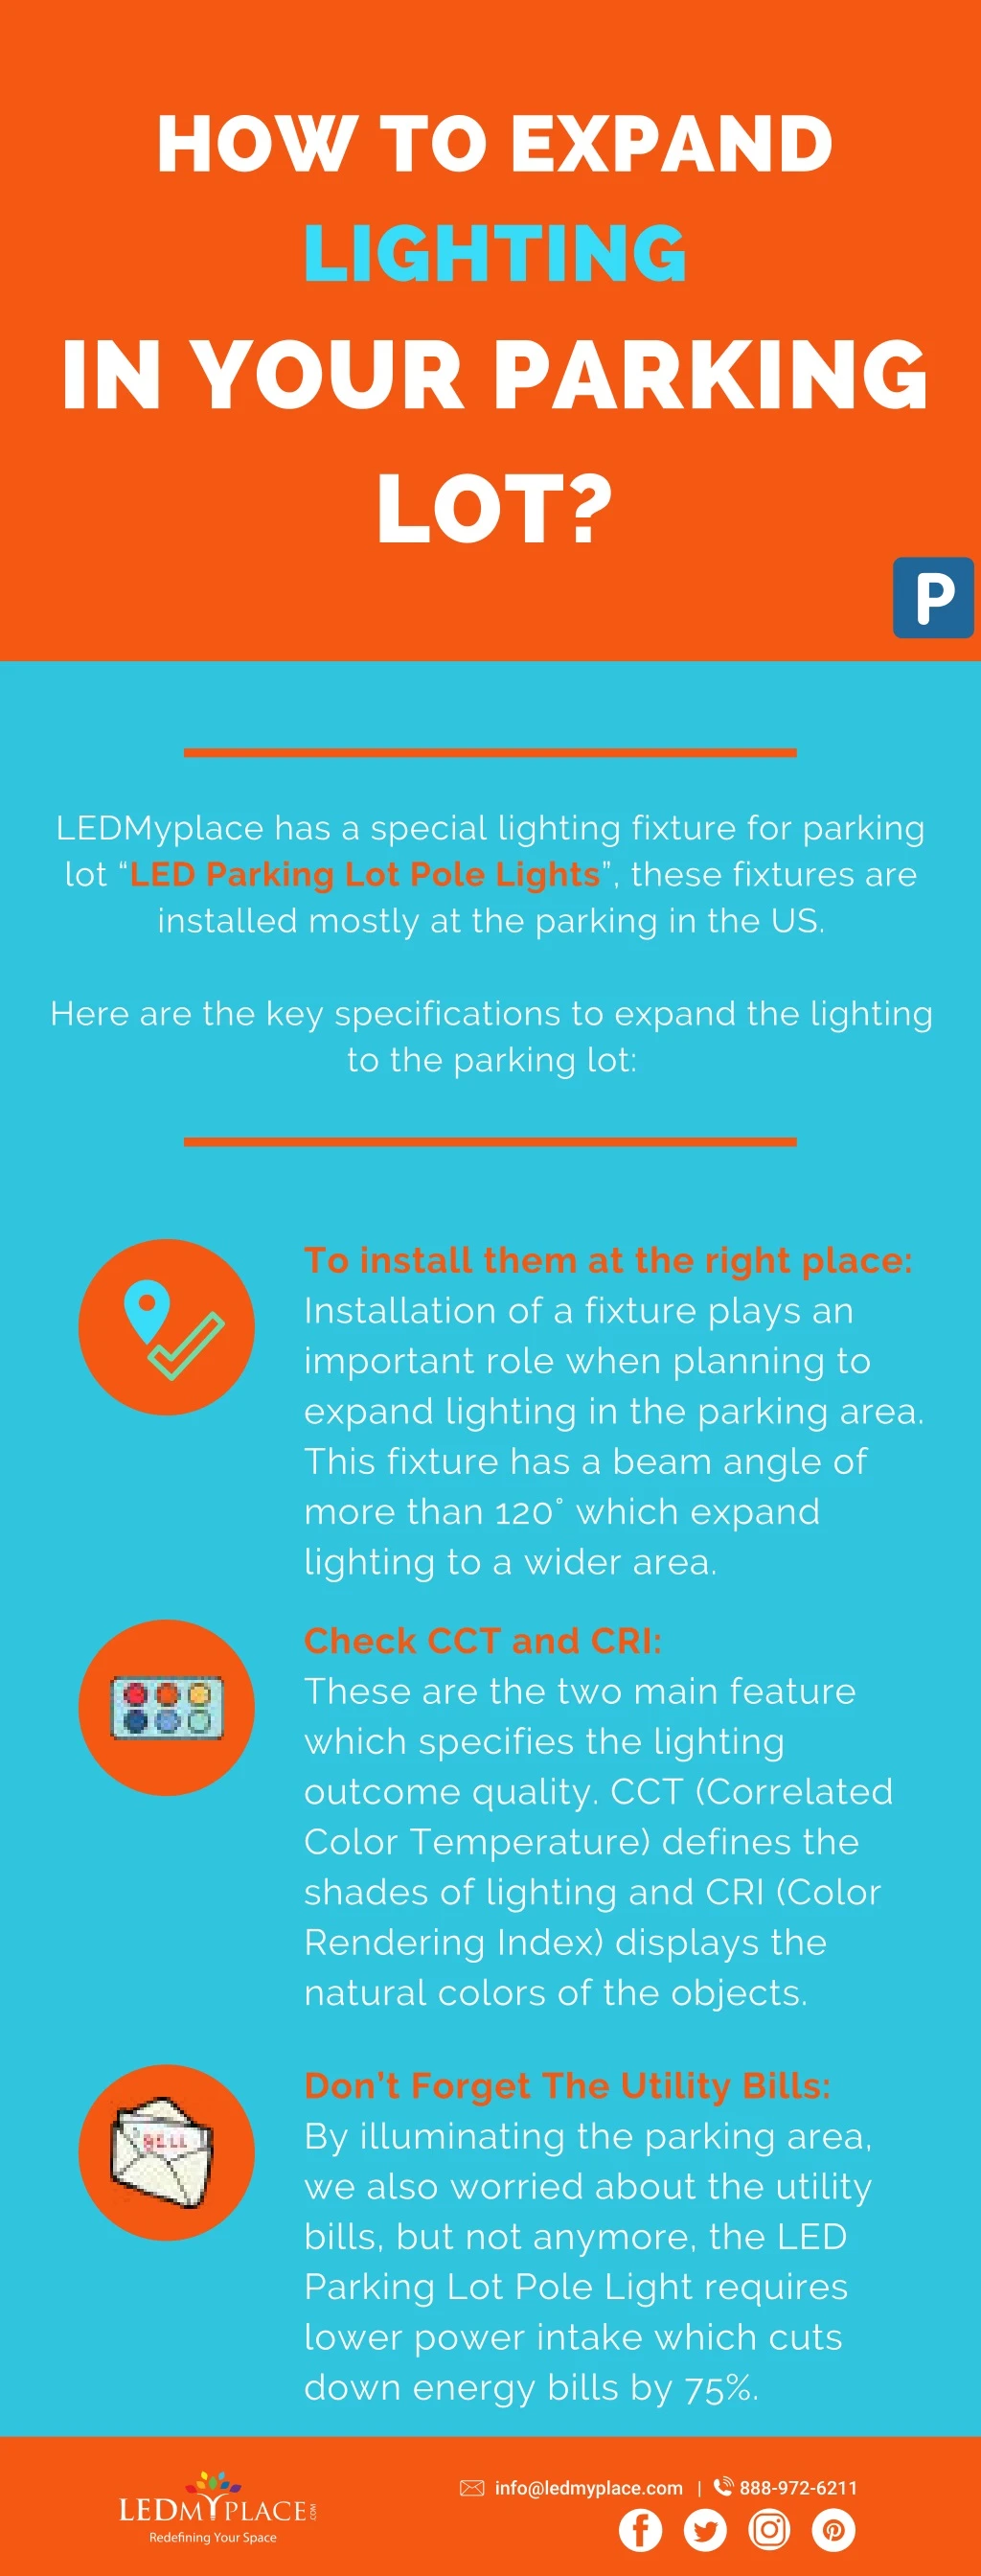 how to expand lighting in your parking lot